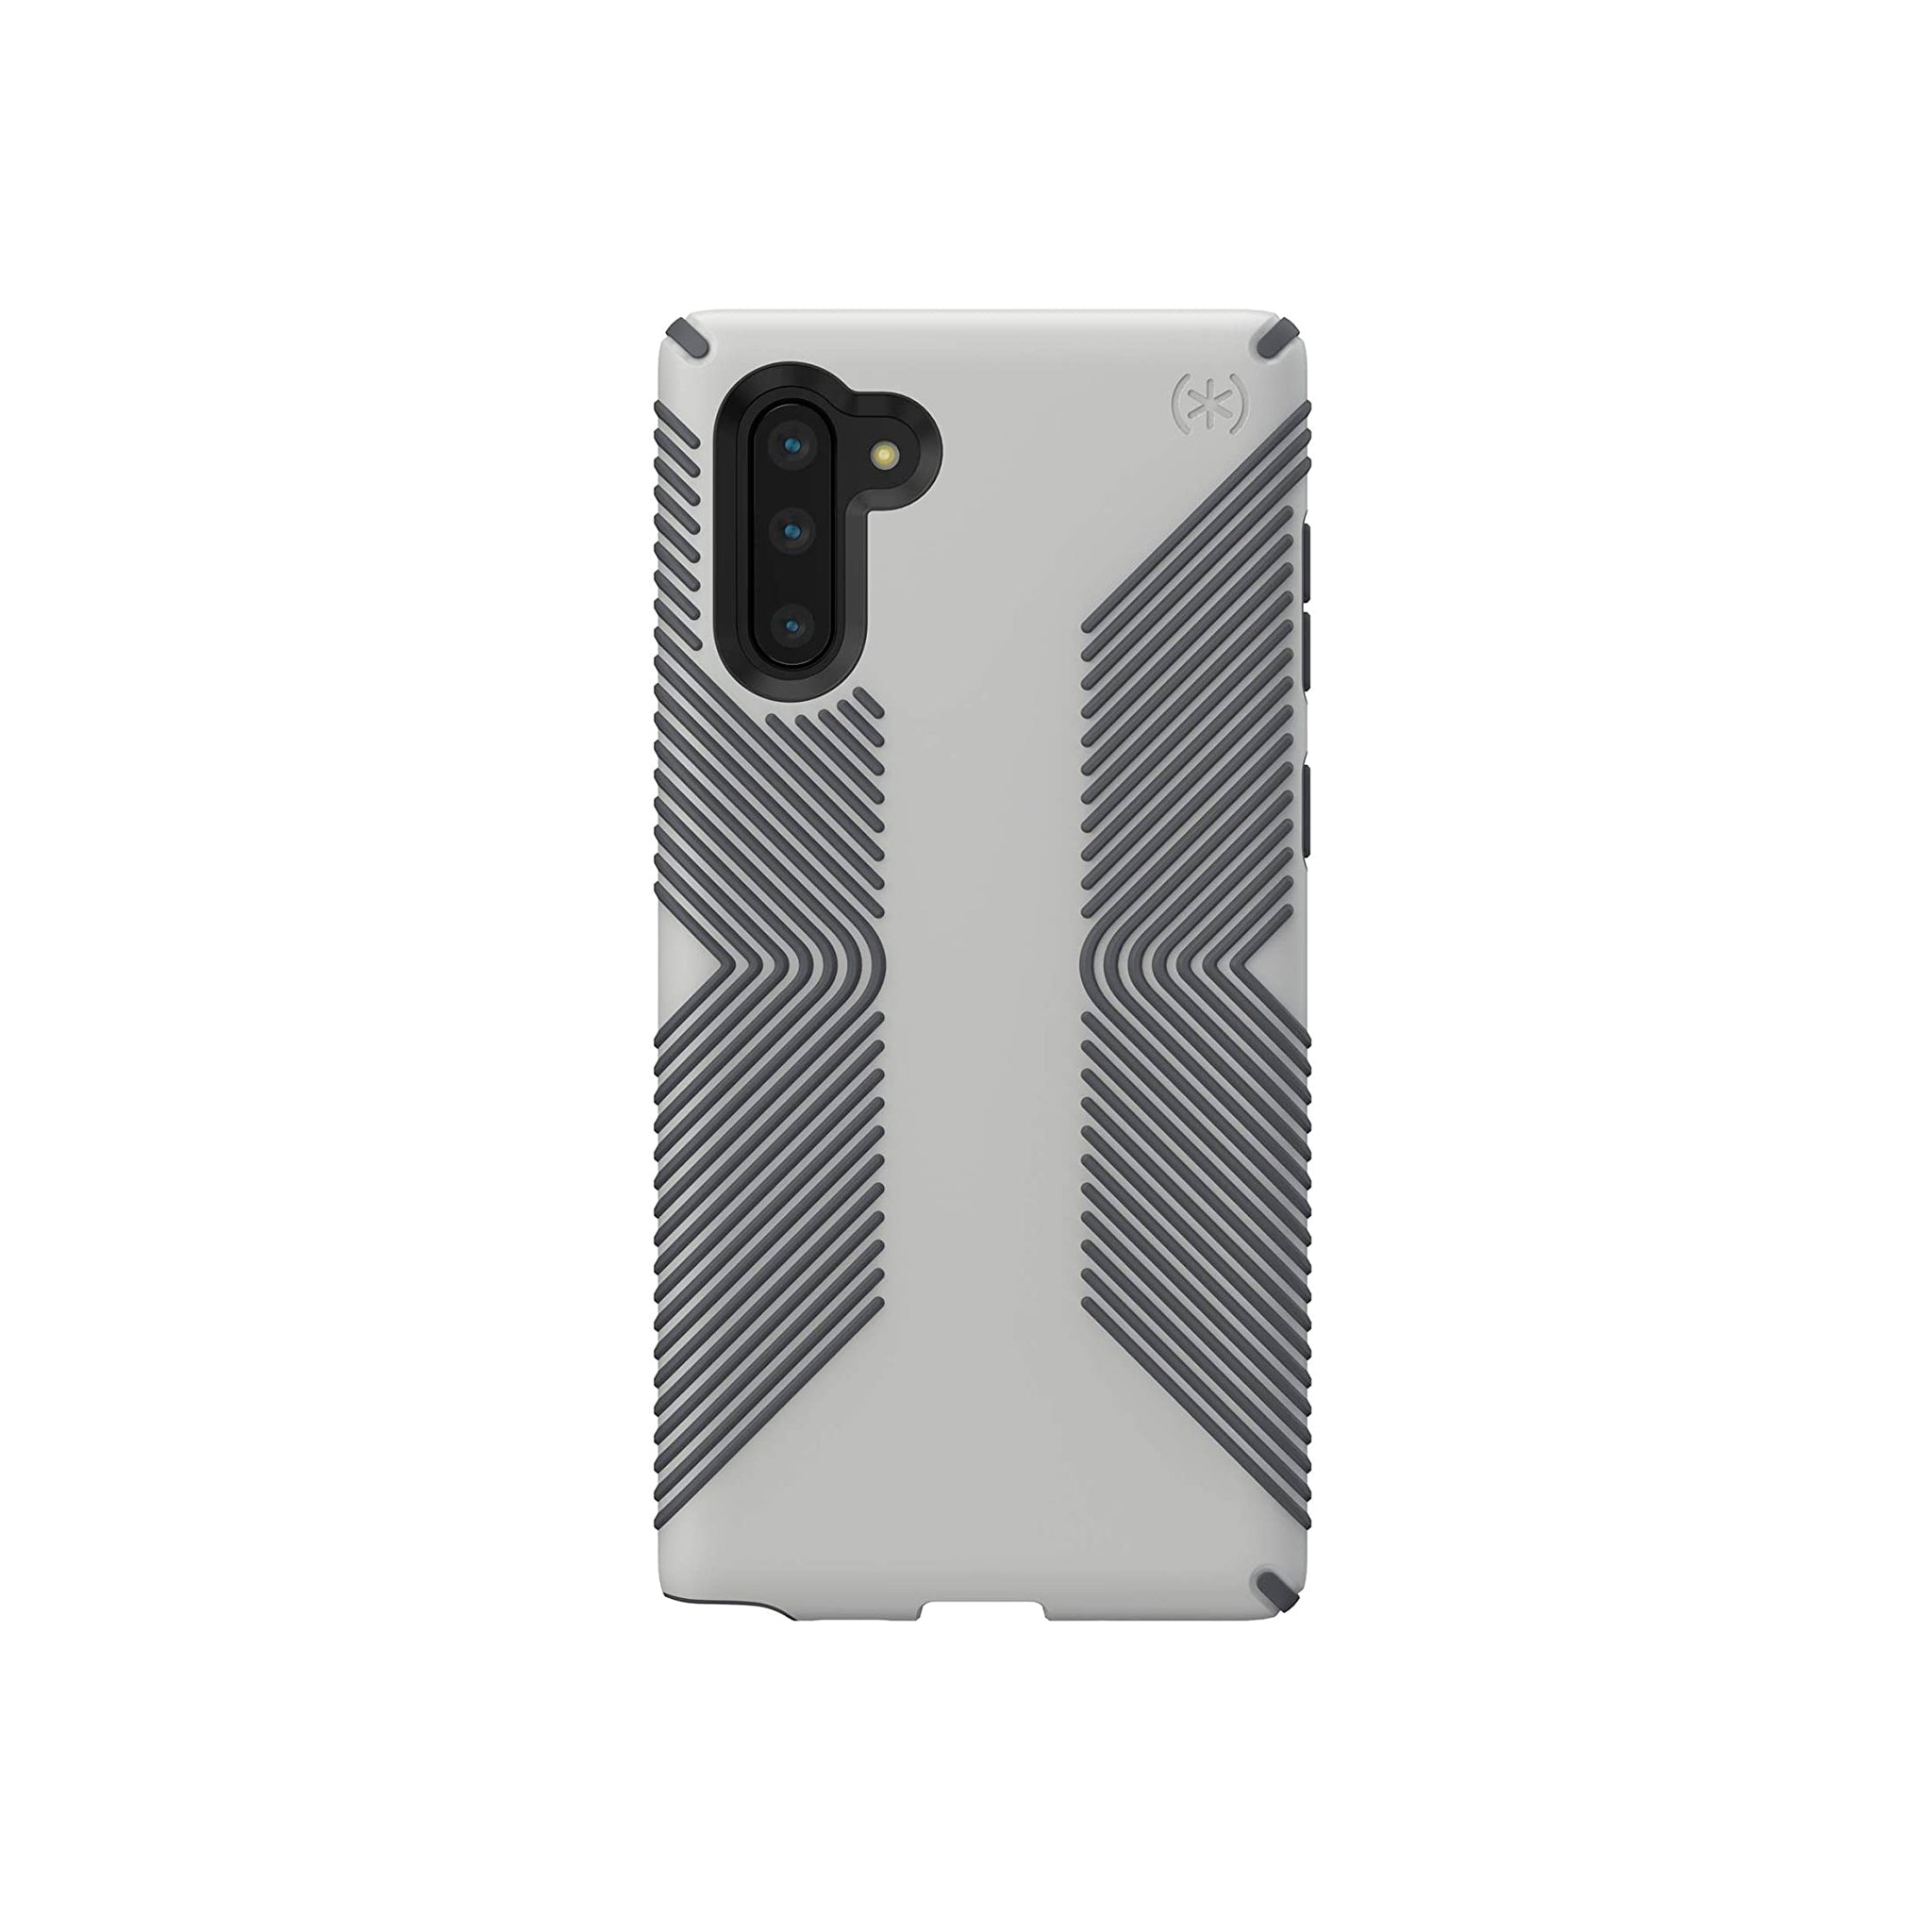 Speck - Presidio Grip Case For Samsung Galaxy Note10 - Marble Gray And Anthracite Gray